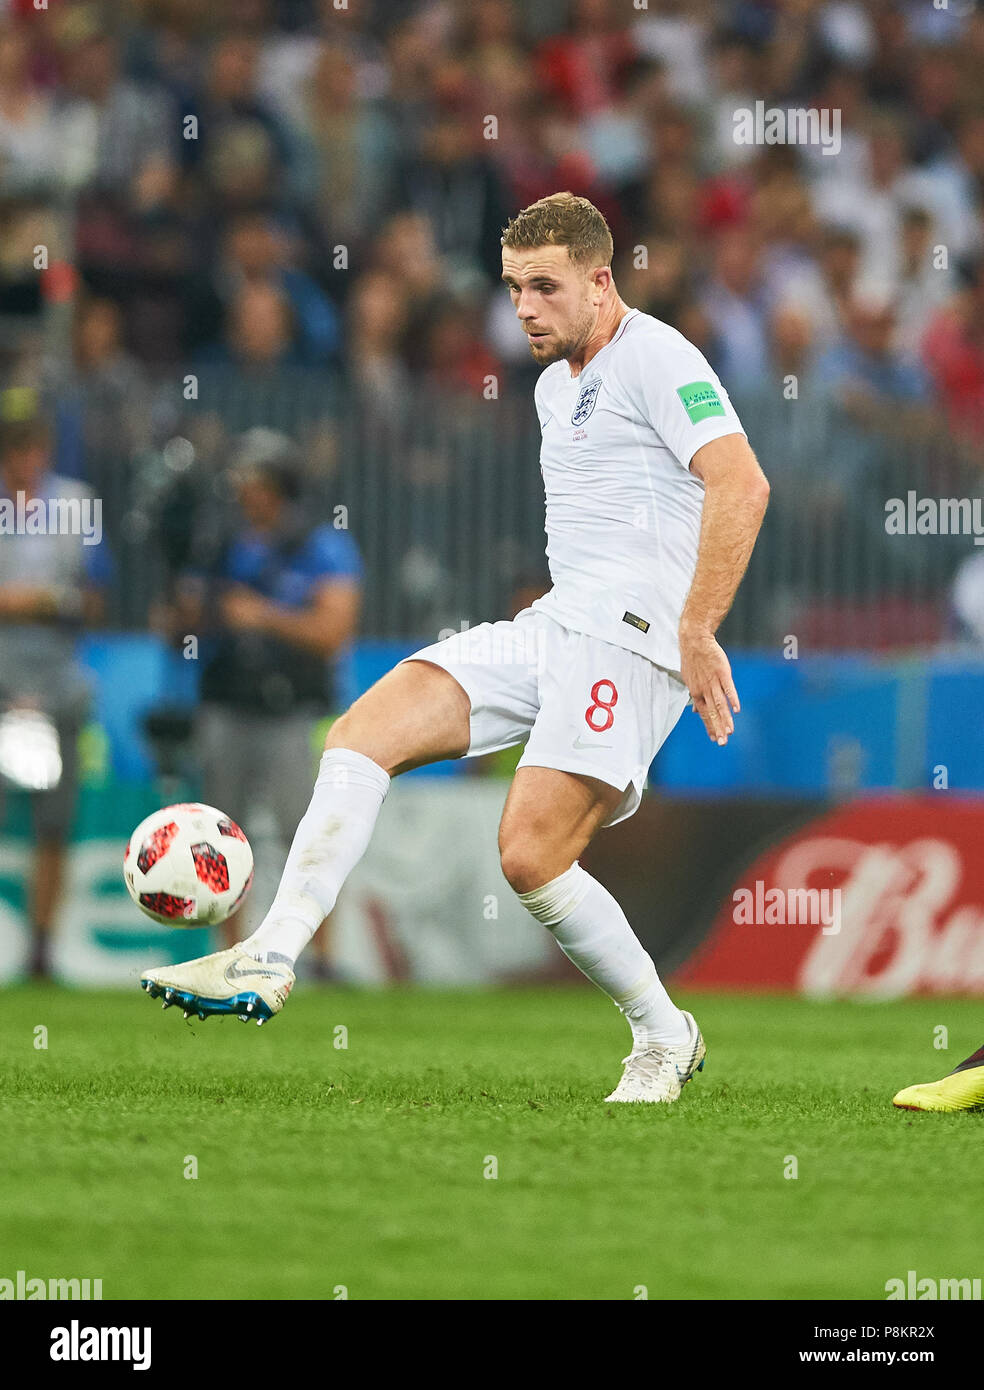 England - Croatia, Soccer, Moscow, July 11, 2018 Jordan HENDERSON, England 8  drives, controls the ball, action, full-size, Single action with ball, full body, whole figure, cutout, single shots, ball treatment, pick-up, header, cut out,  ENGLAND  - CROATIA 1-2 Football FIFA WORLD CUP 2018 RUSSIA, Semifinal, Season 2018/2019,  July 11, 2018 in Moscow, Russia. © Peter Schatz / Alamy Live News Stock Photo